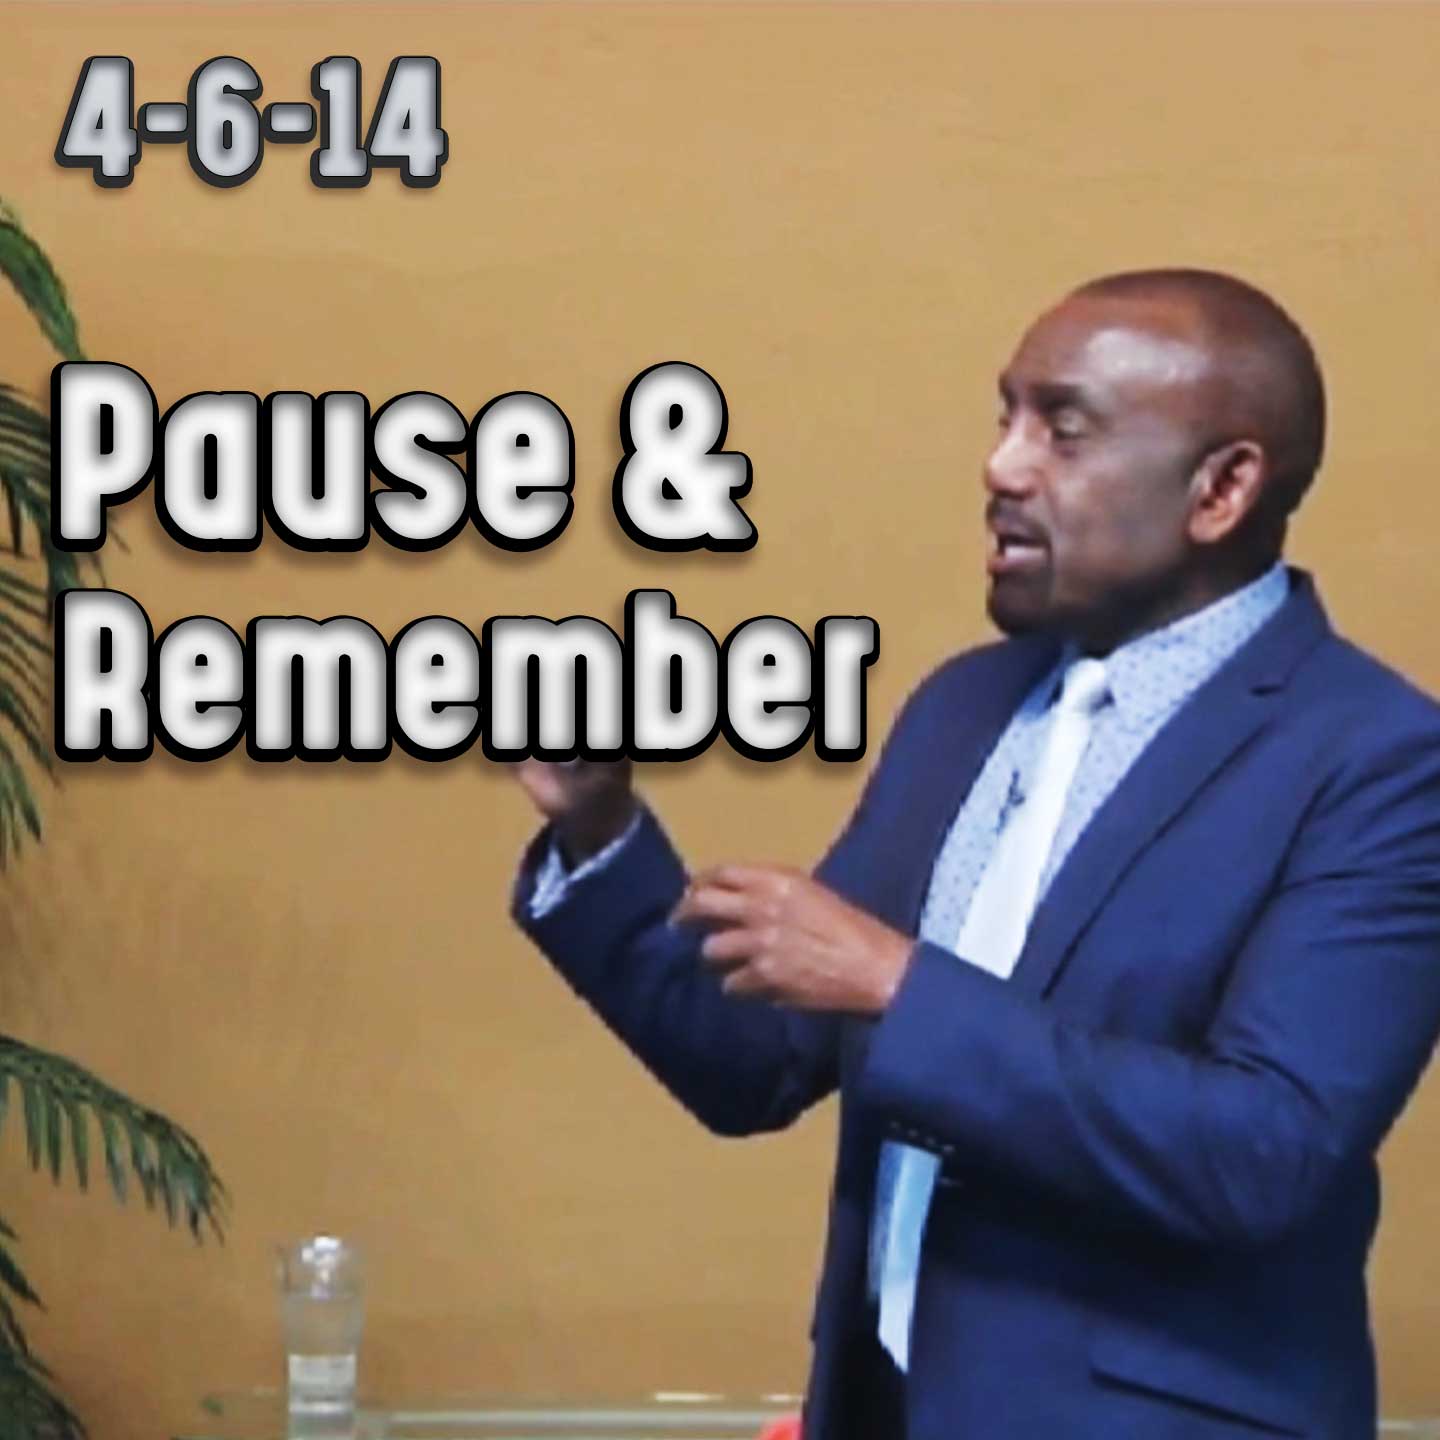 Rejoice in the Lord: Pause and Remember (Church Archive 4/6/14)